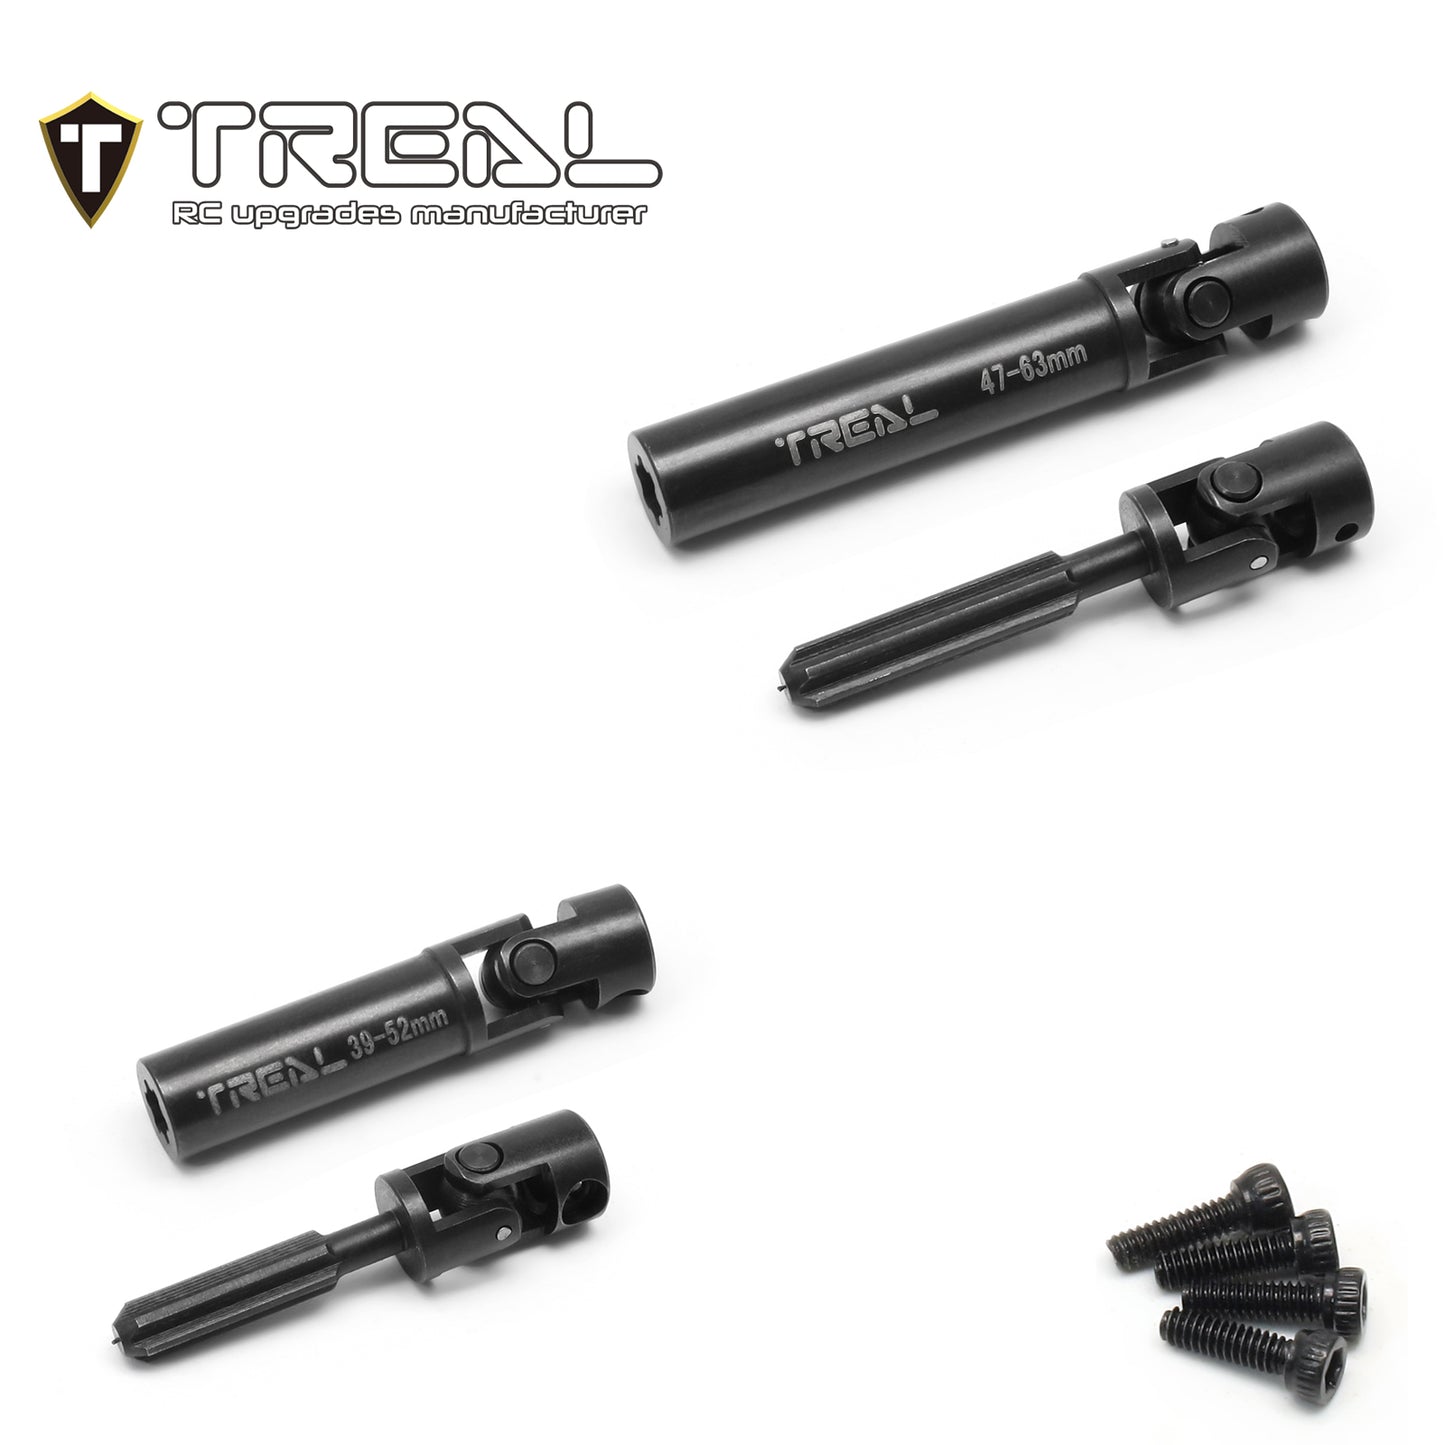 TREAL AX24 Driveshaft Set Harden Steel Metal Center Drive Shafts (2P) for 1:24 Axial AX24 XC-1